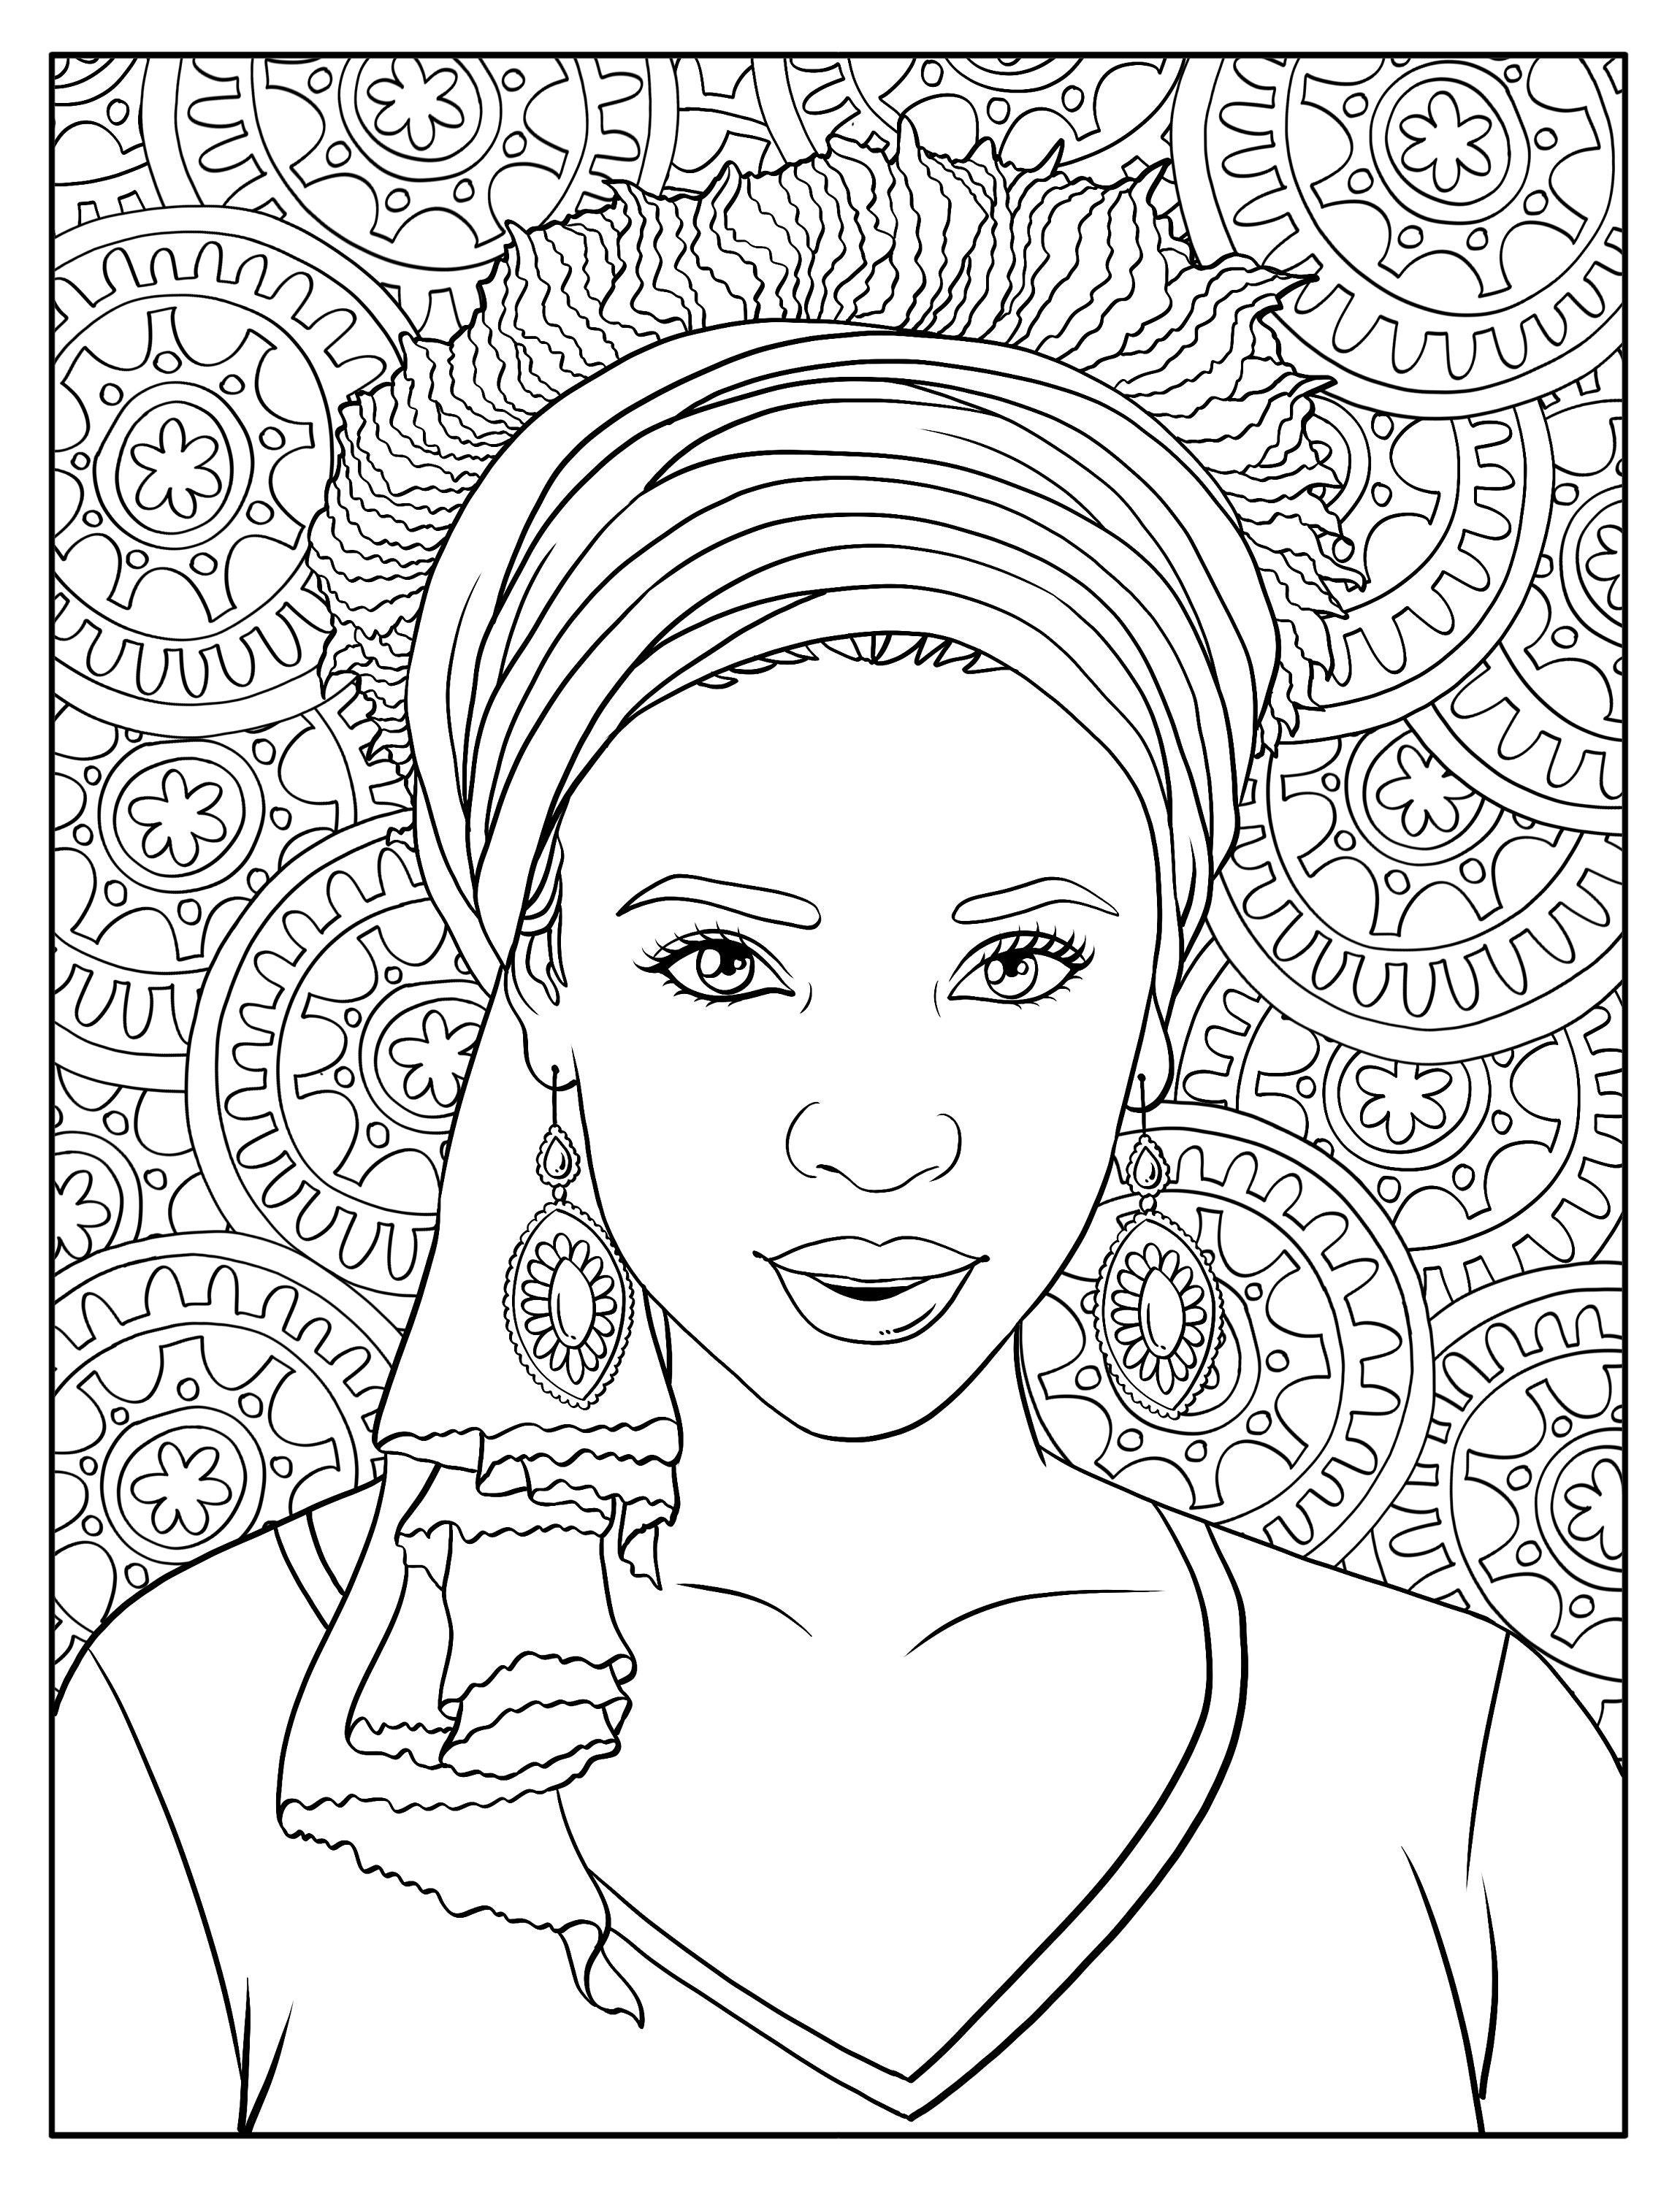 Black Women Adult Coloring Book: African American Coloring Books for Girls;  35 Intricate Ethnic Hairstyles Fashion Coloring Pages with Braids Afro